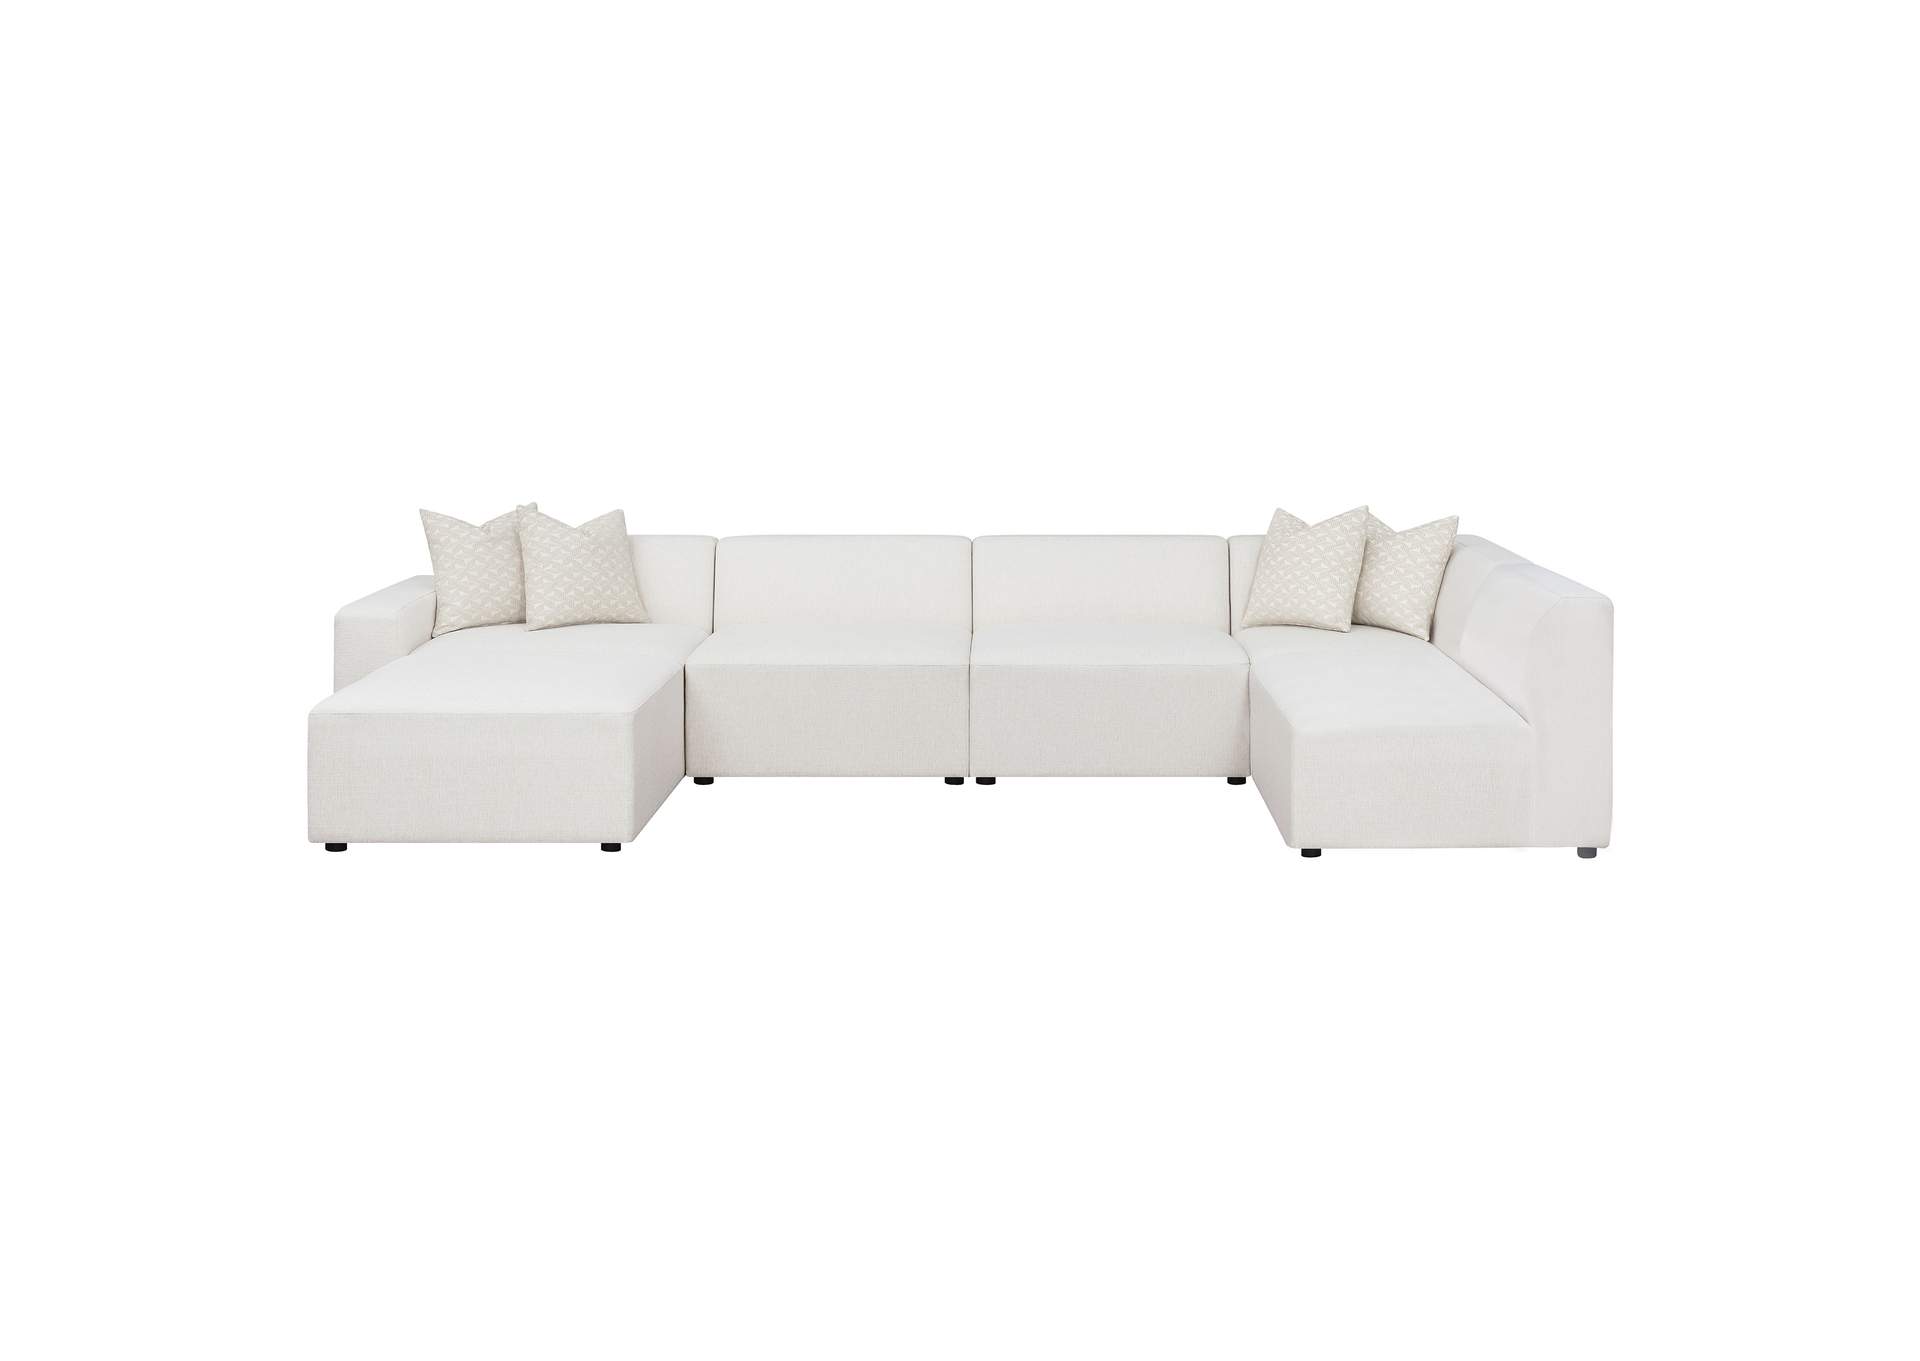 Freddie 6-piece Upholstered Modular Sectional Pearl,Coaster Furniture